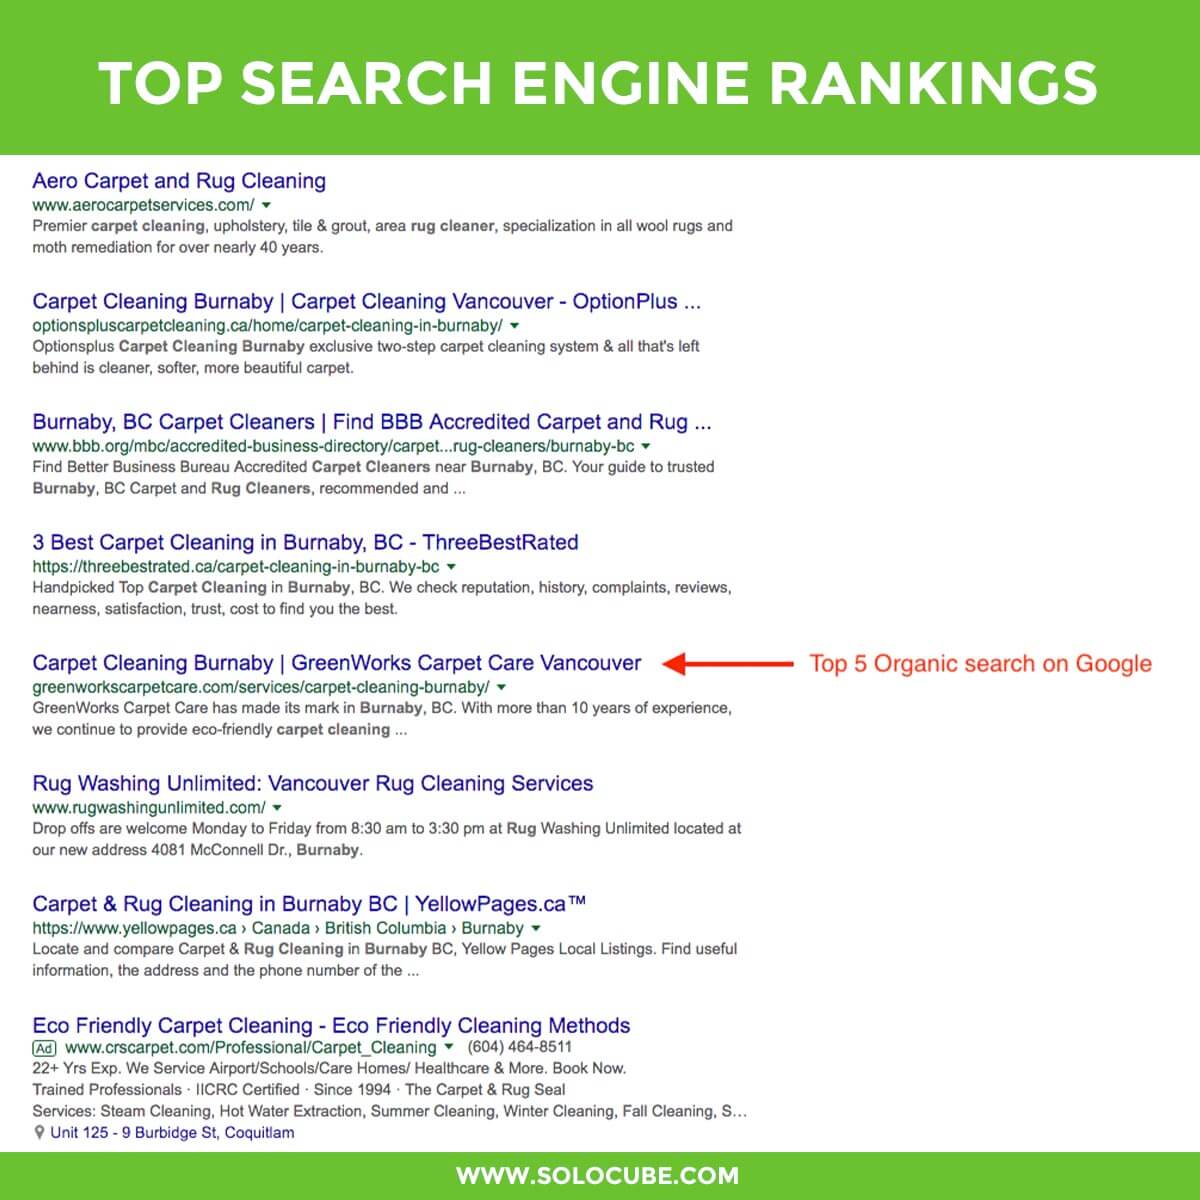 top SEO google ranking by solocube 11 - SEO Prince George, BC